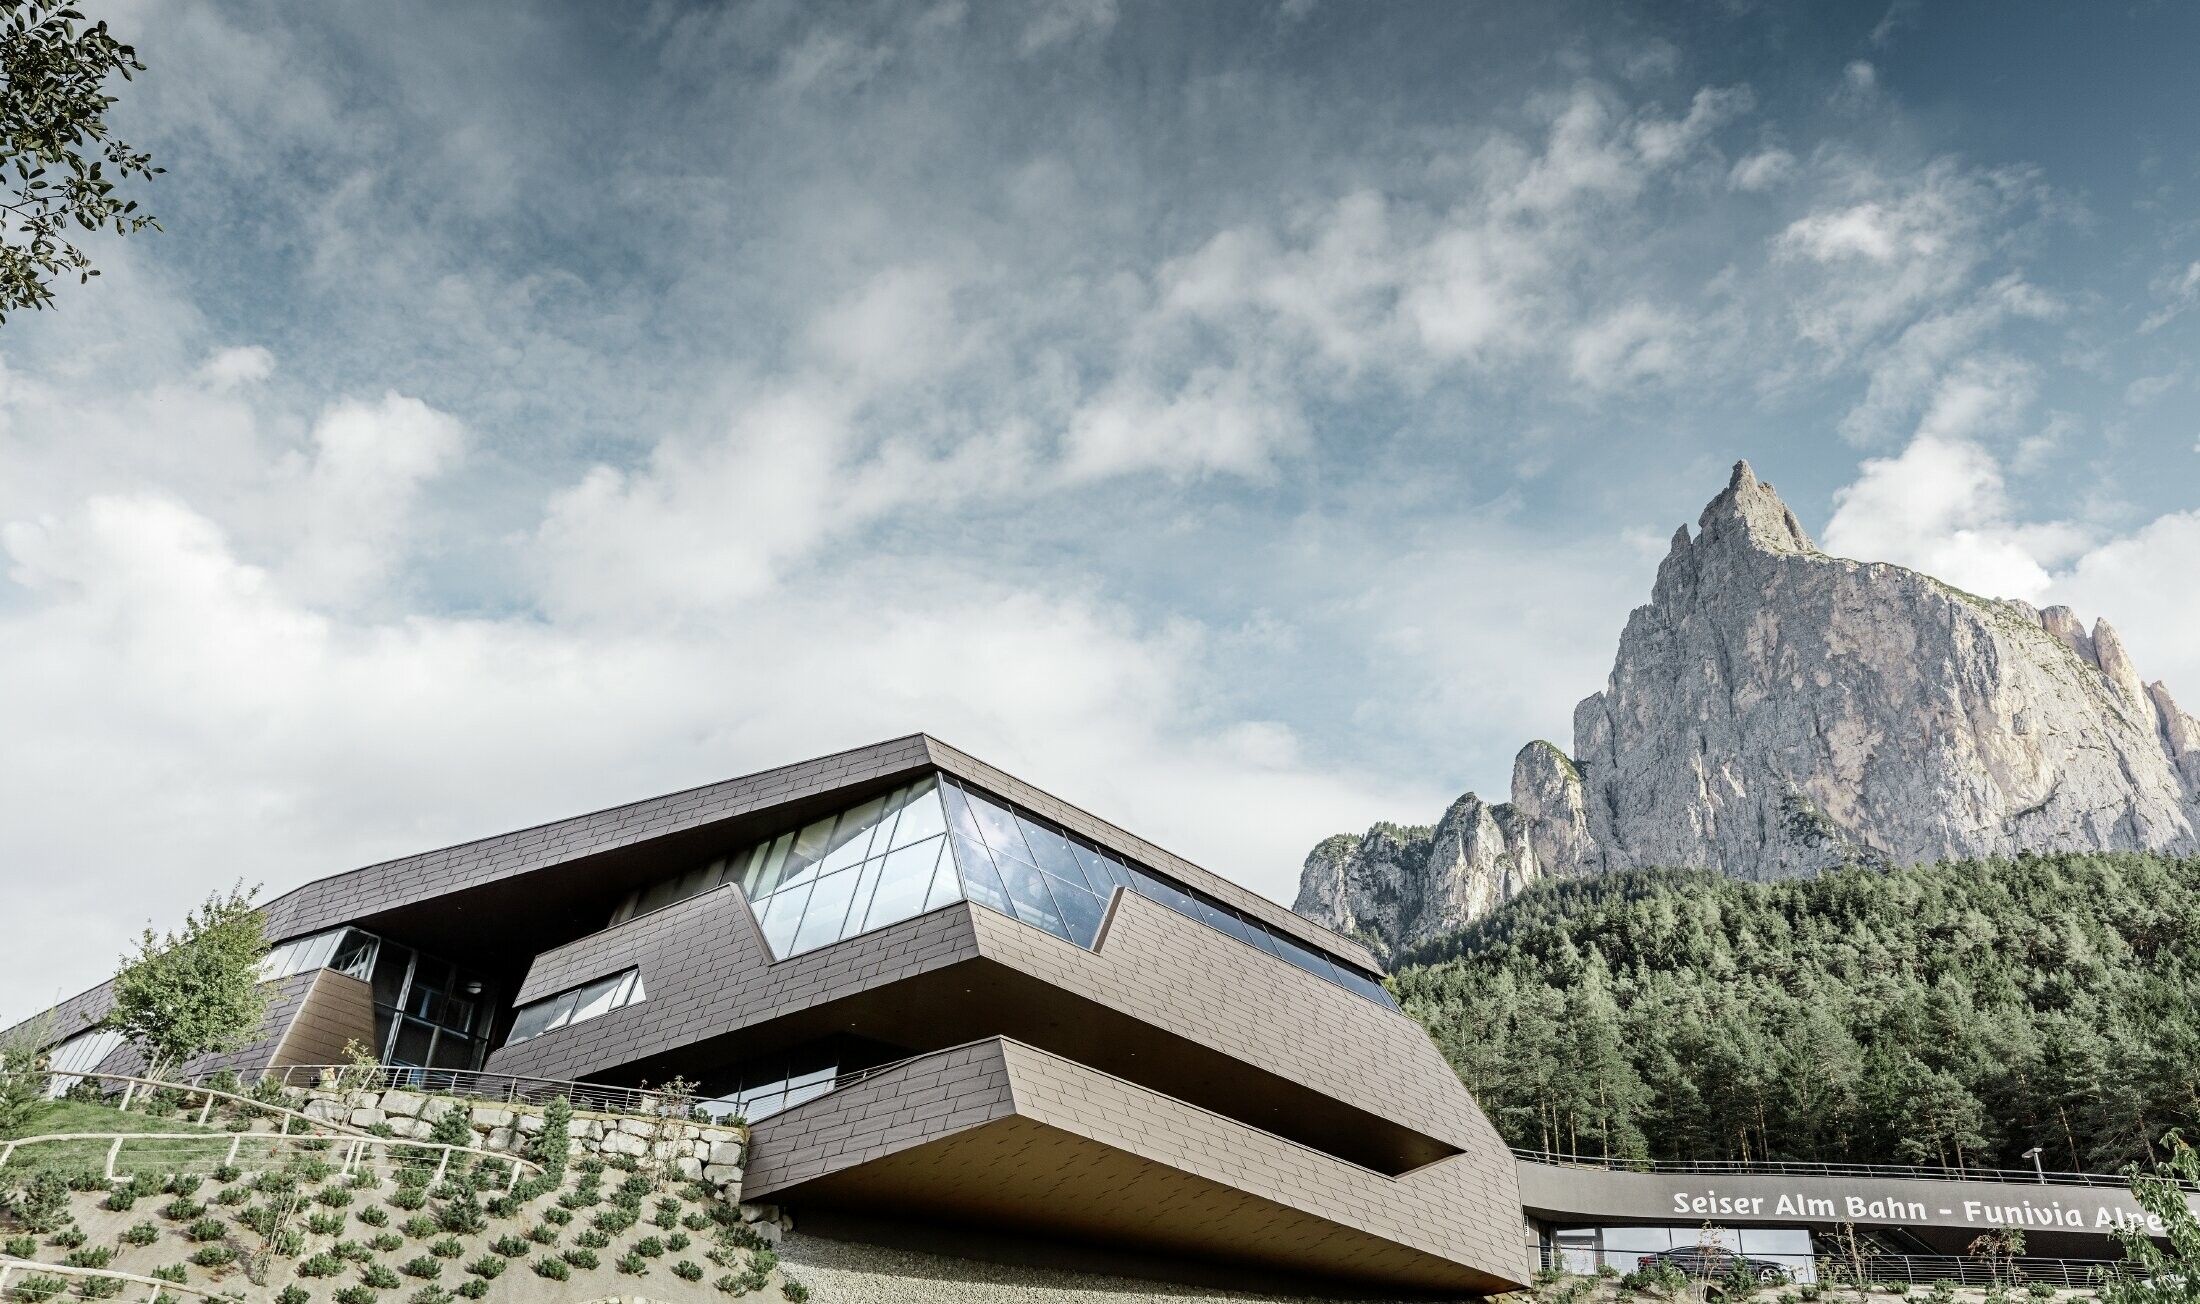 Redesigned valley station for the Seiser Al shuttle service in Italy, resembling the Dolomites in the background with irregular edges and surfaces, and an aluminium façade in brown by PREFA